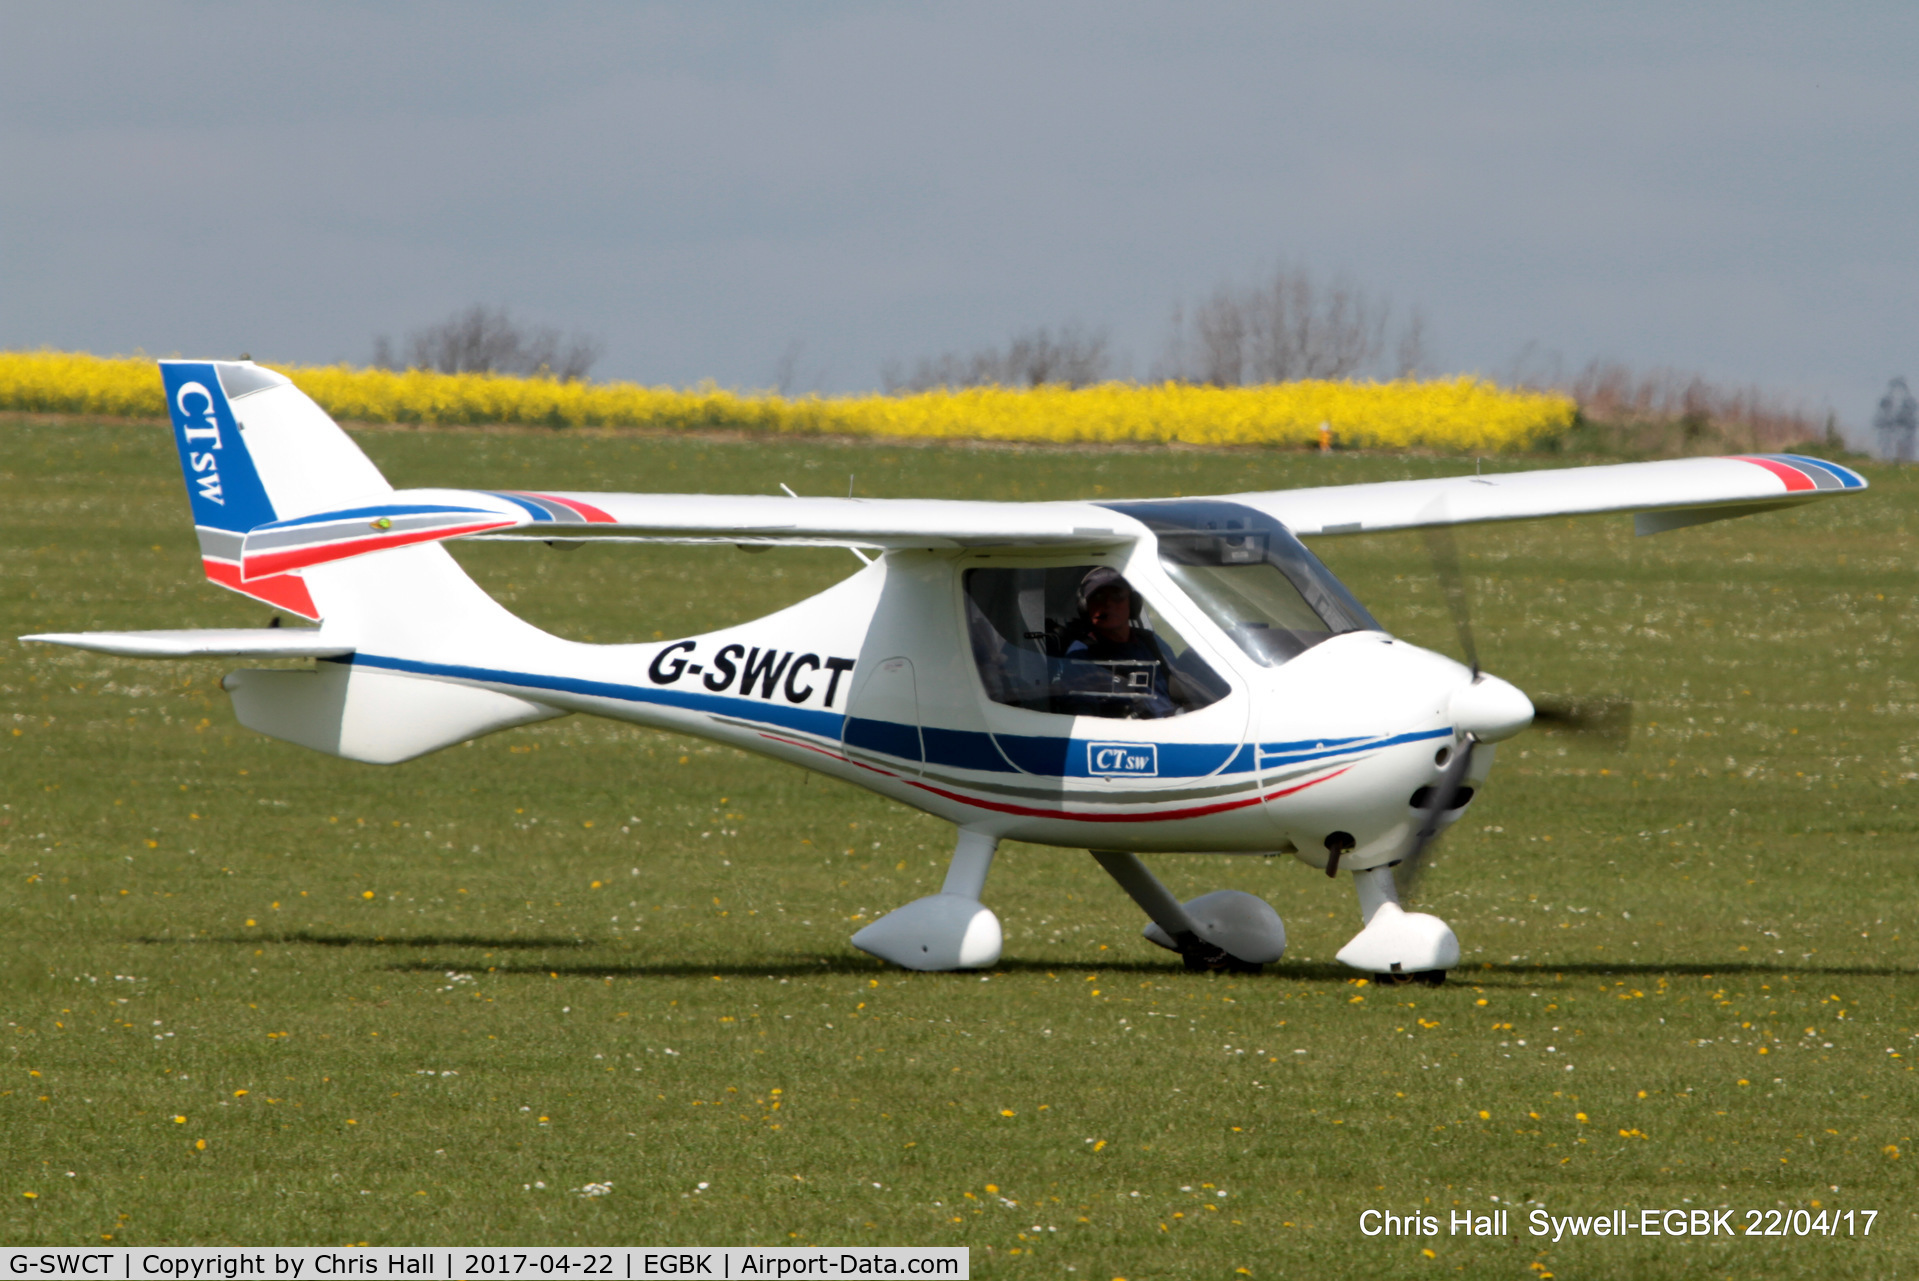 G-SWCT, 2008 Flight Design CTSW C/N 07.11.05, at Sywell